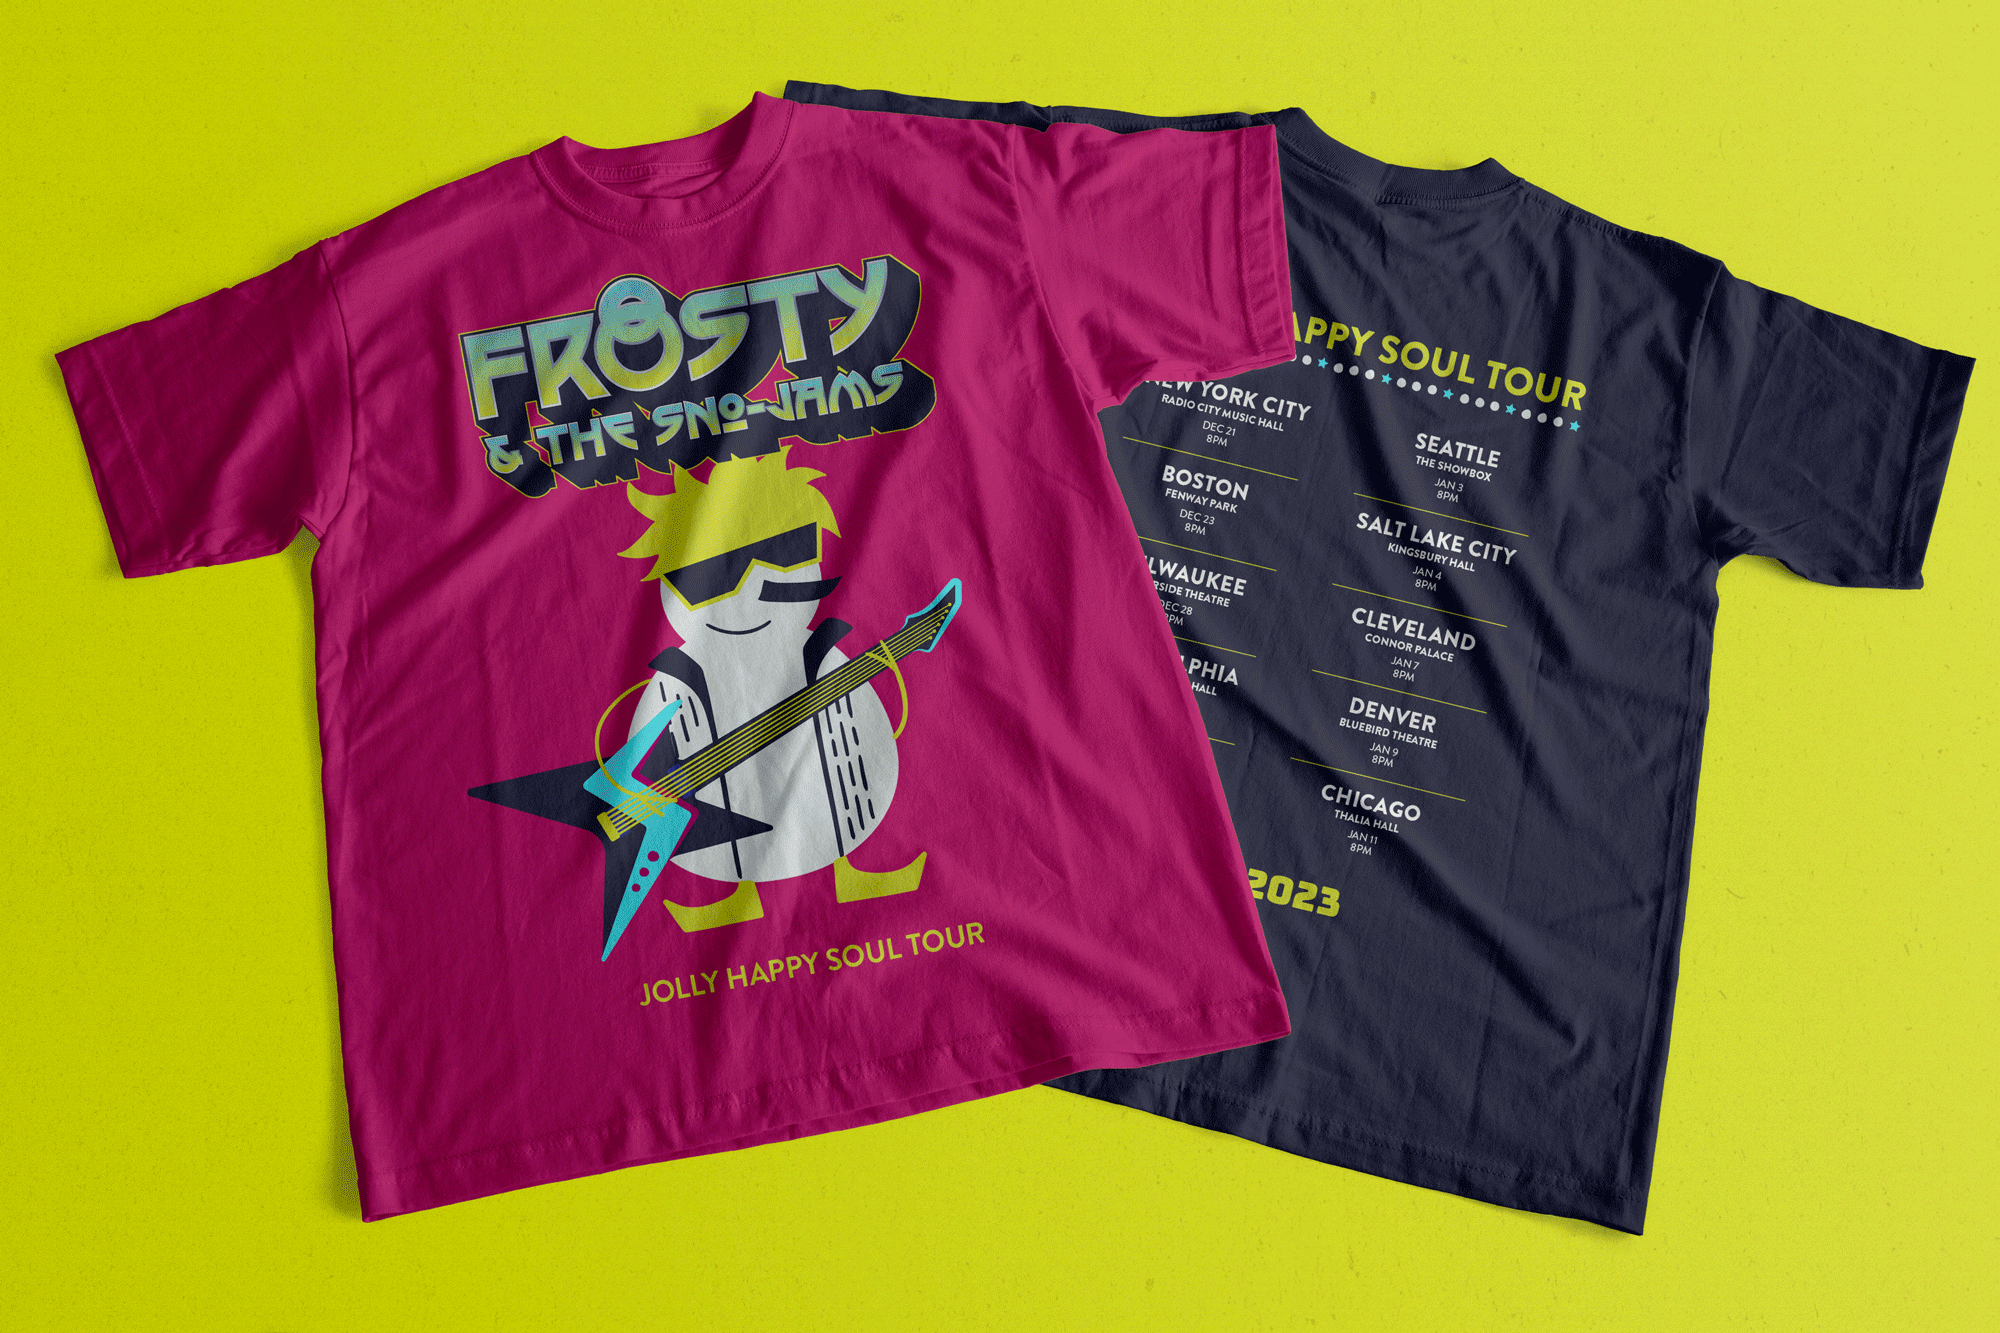 An animation of red, blue, and black t-shirts with designs for Frosty's Jolly Happy Soul tour